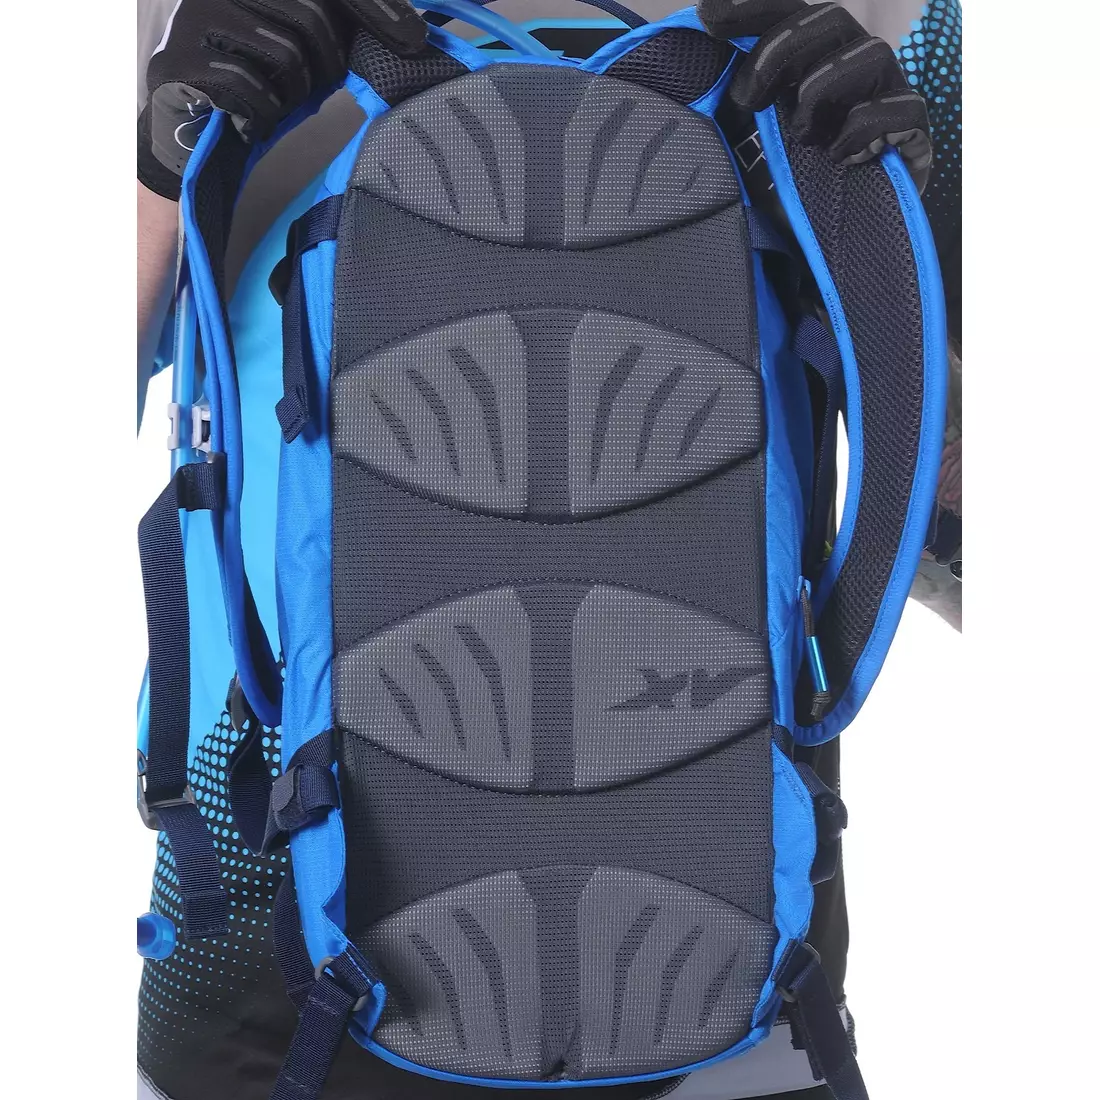 CAMELBAK SS15 MULE backpack with water bladder. Electric Blue